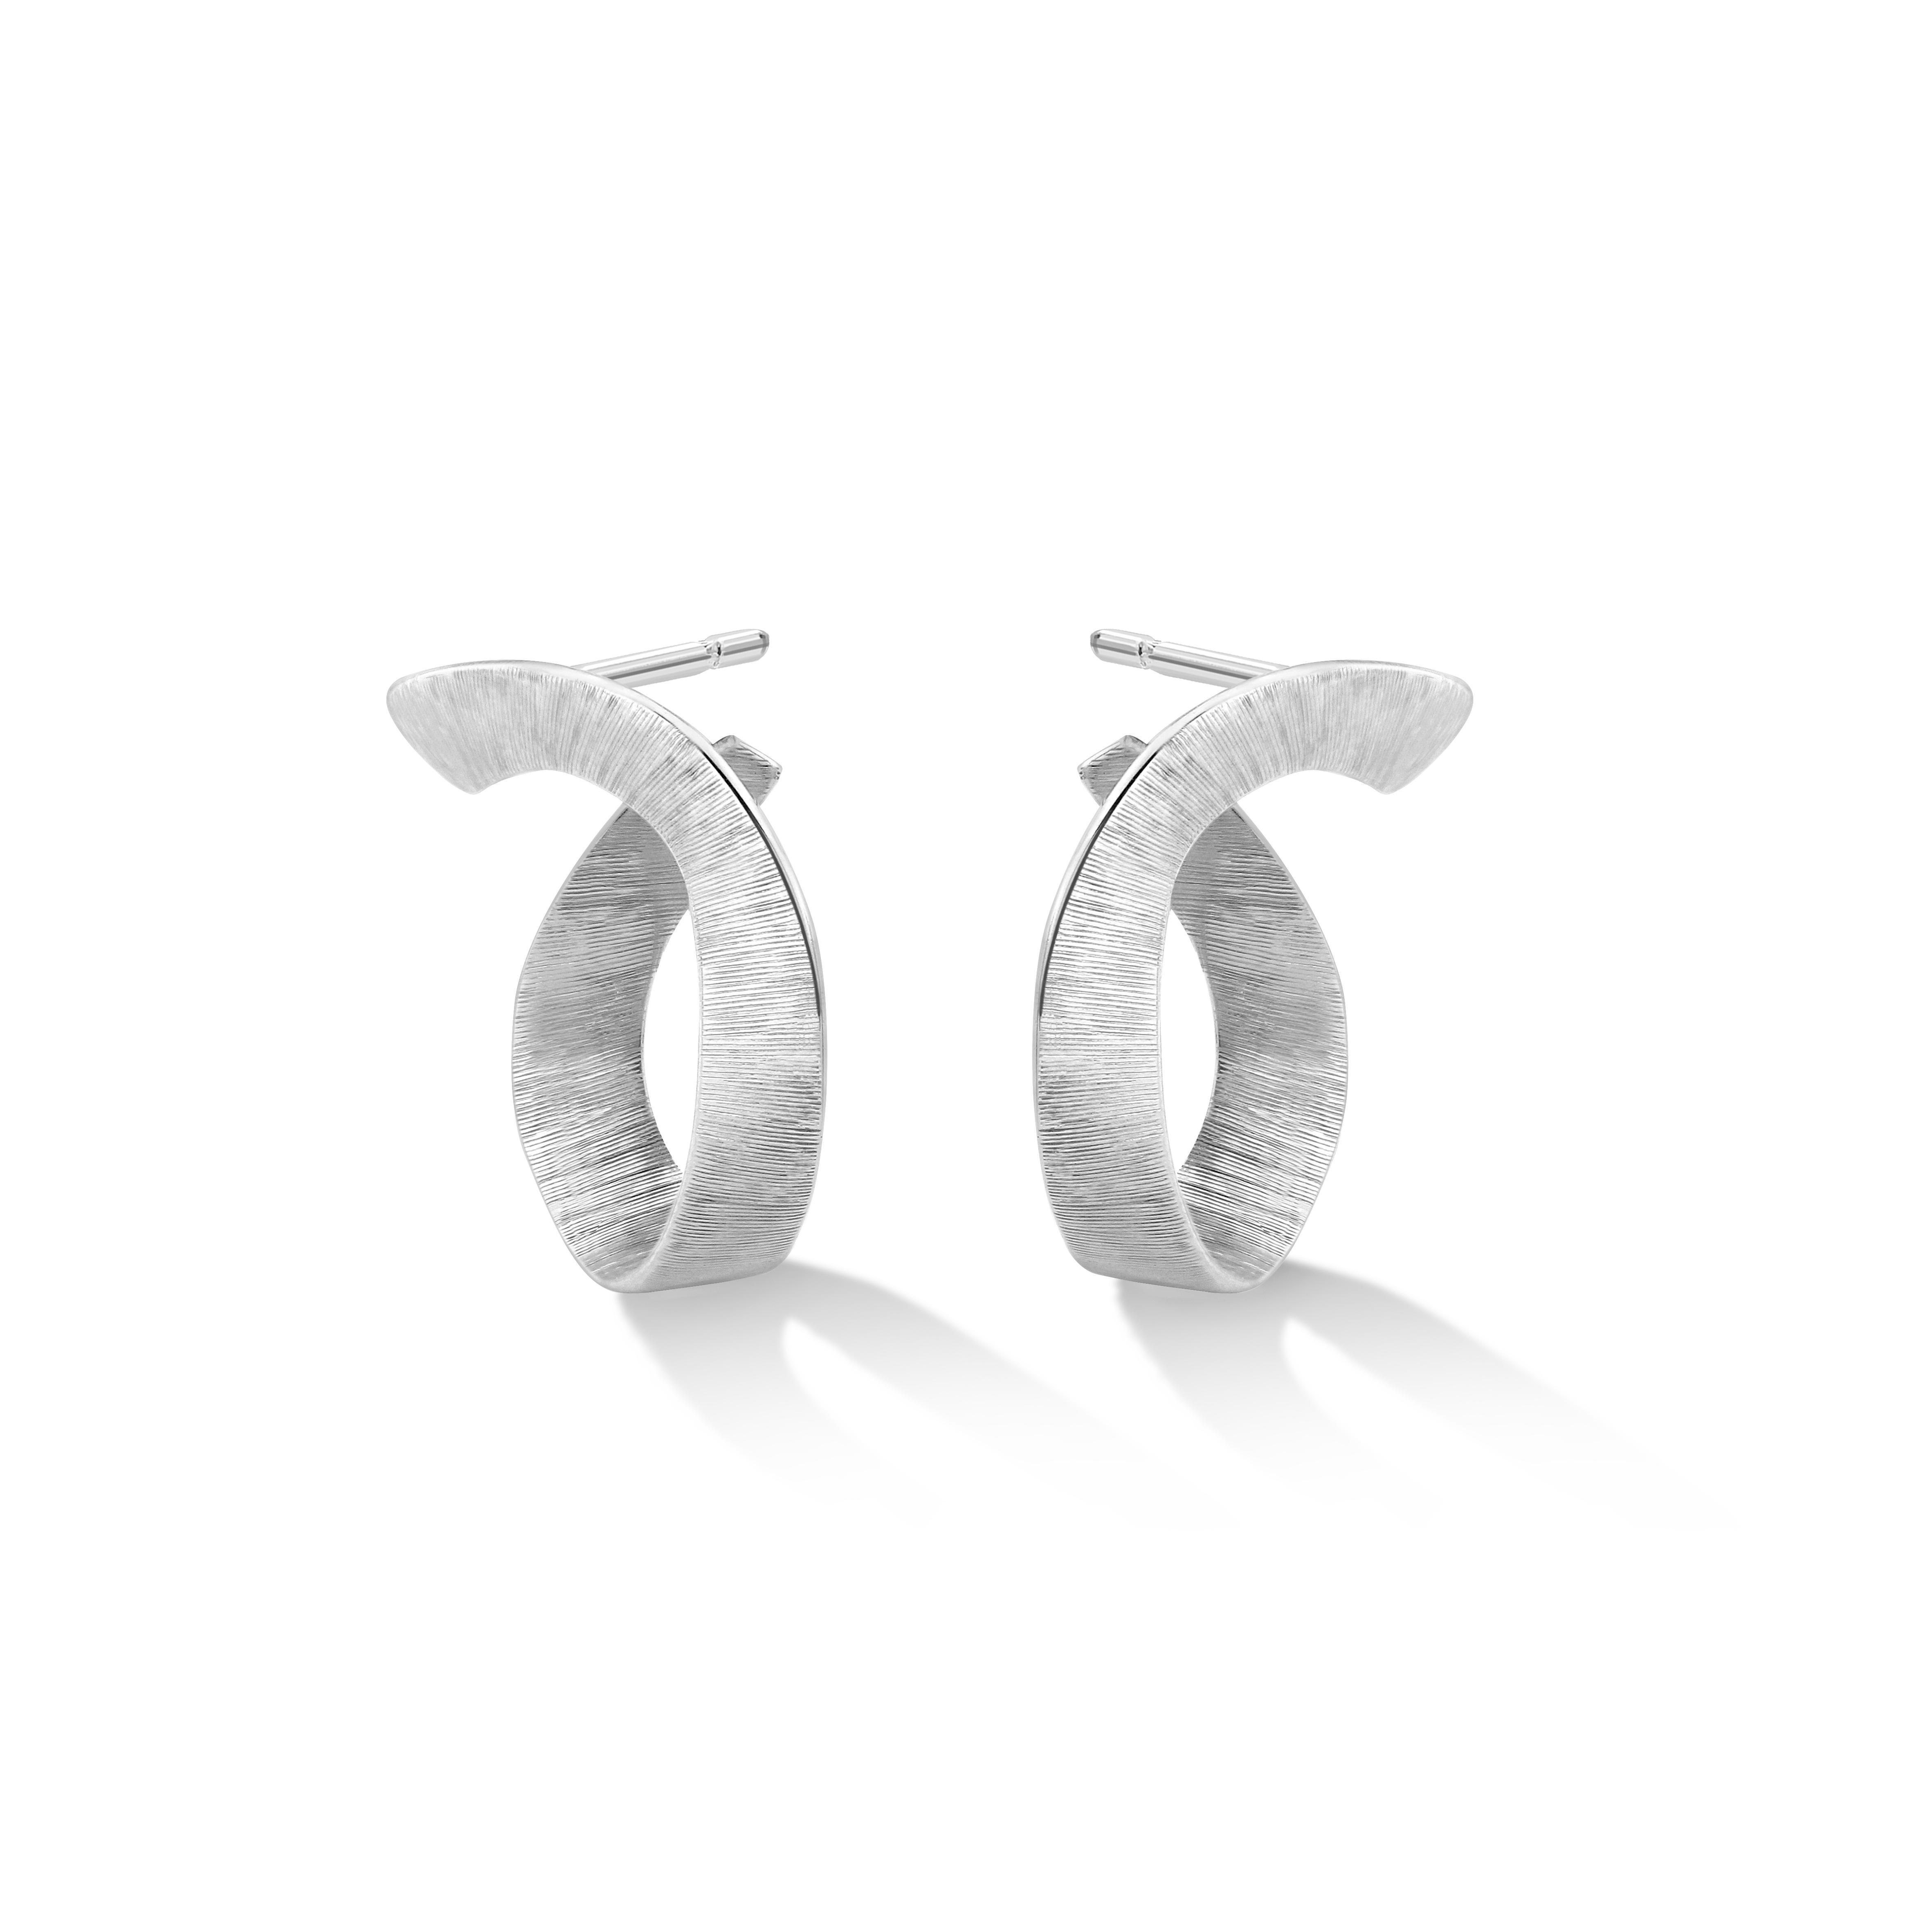 Liv Luttrell 
Twist Hoop Earrings 2020


Details
18-karat white gold 
Silk engraving
Made in London  


Customisation 

As this design is handmade to your order, Liv is able to customise the material choices according to individual orders.

This